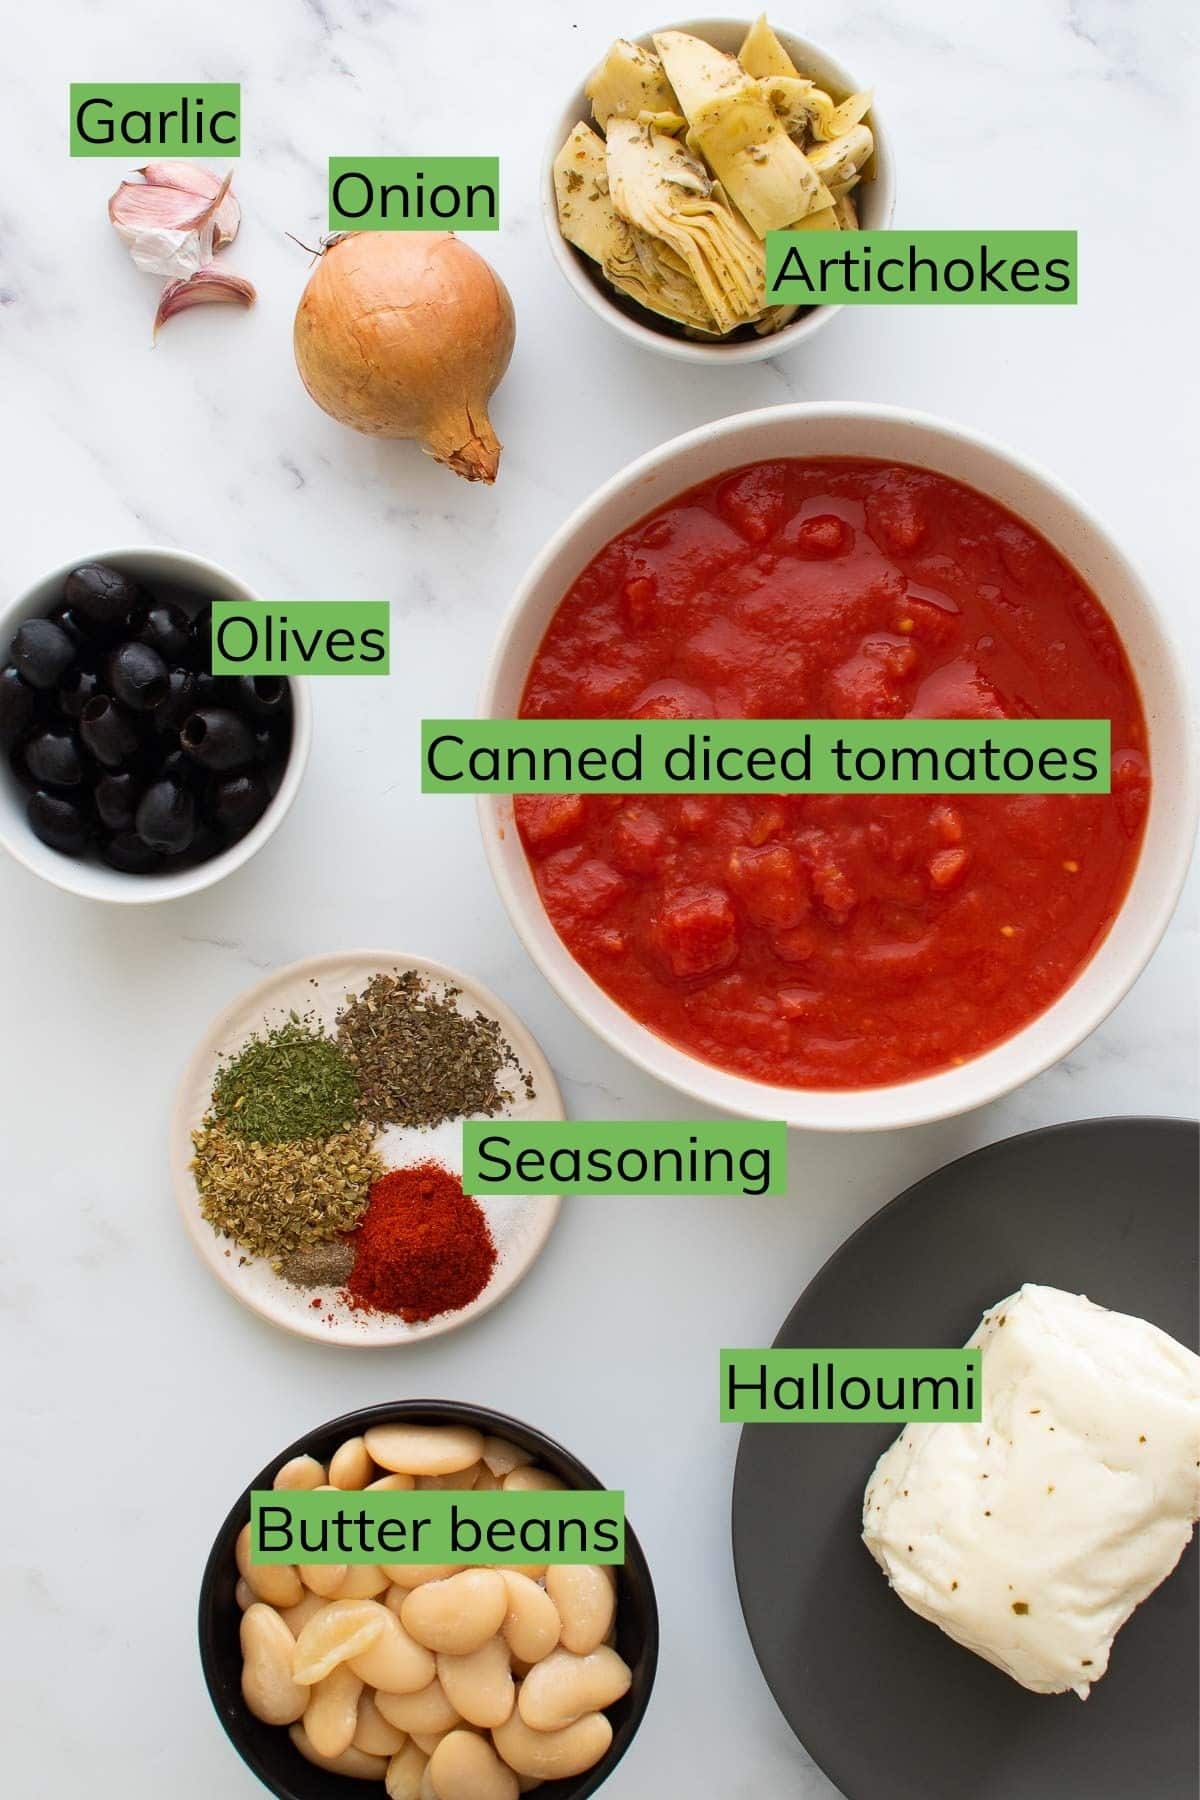 The ingredients to make baked halloumi laid out on a table.